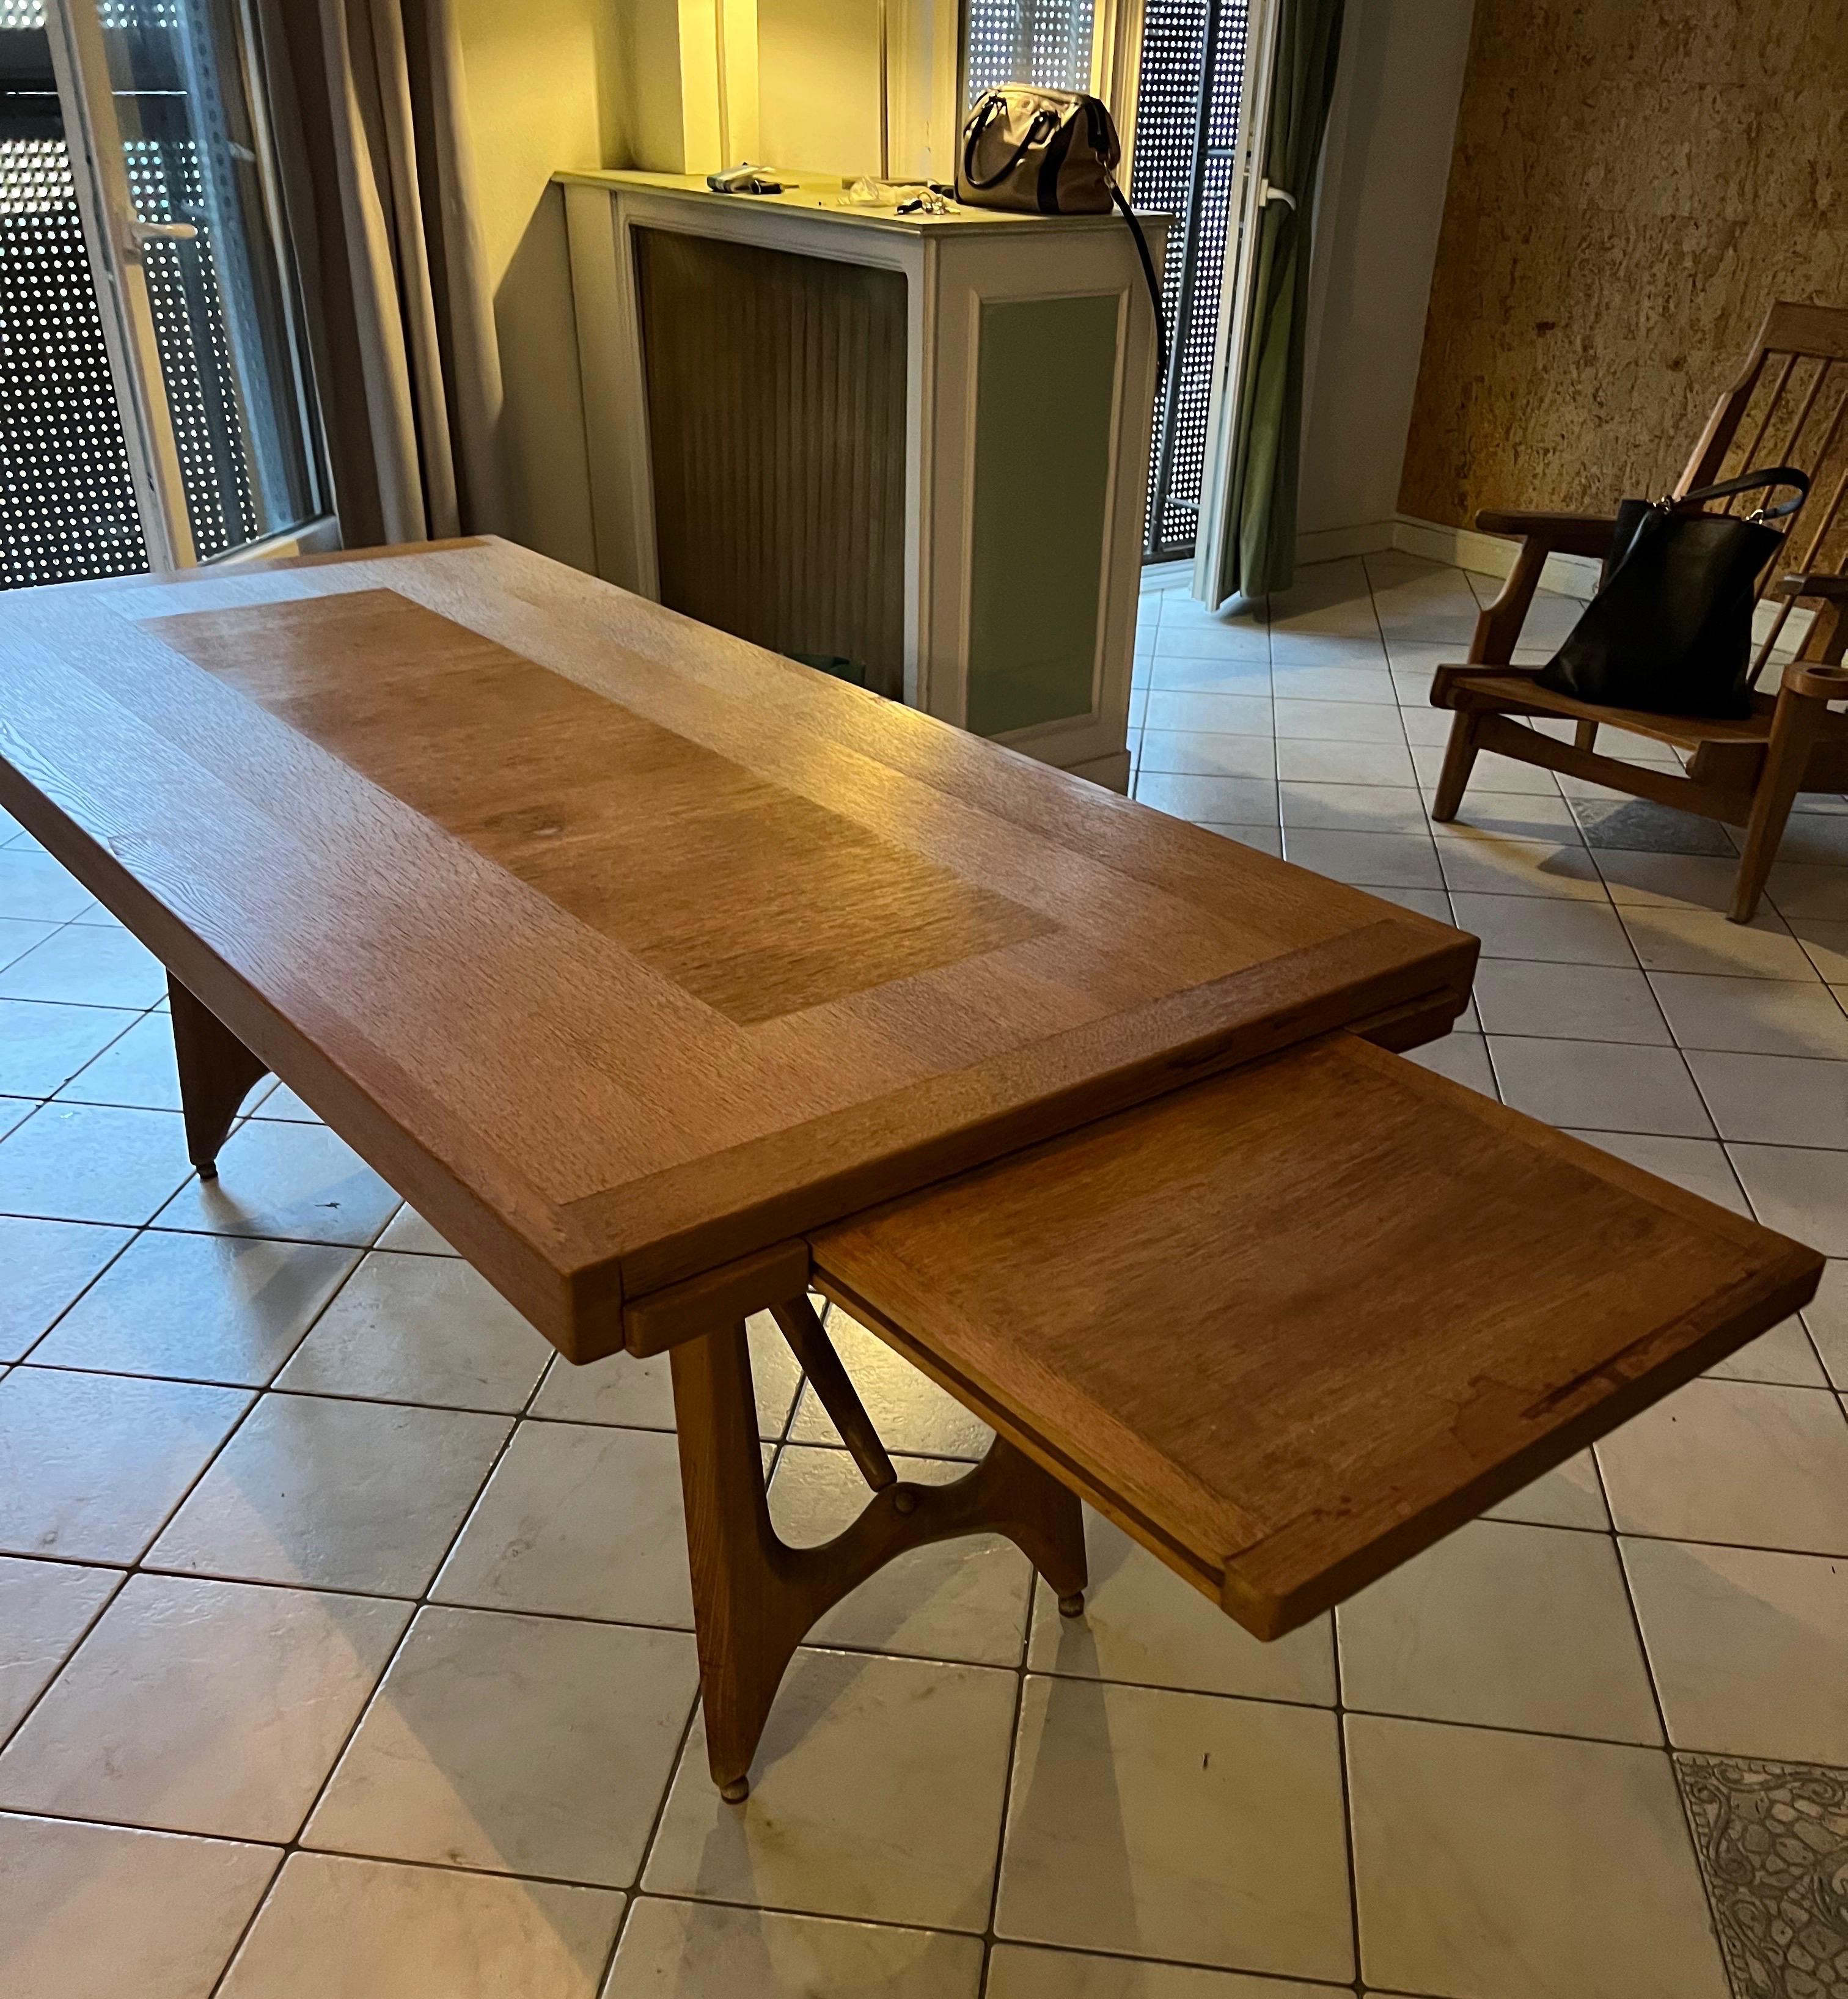 An oak dining table with two leaves incorporated of approximately45 cm each by Guillerme et Chambron edition votre maison.